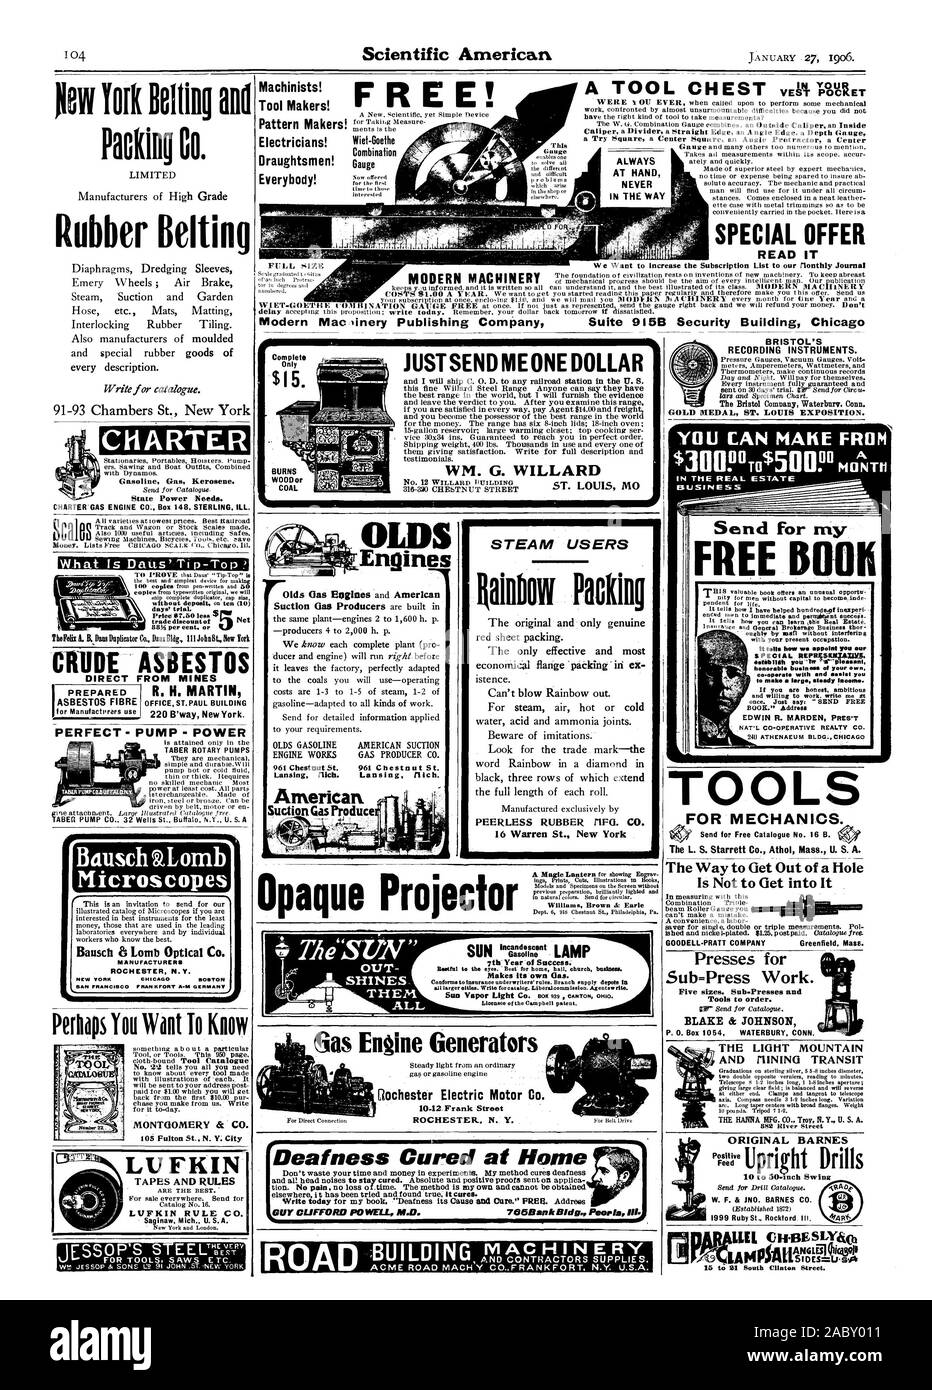 A TOOL CHEST vELI- ;MET Row York Belling and Packing Co. Rubber Belting CHARTER What Is Daus' Ti p-Top days' trial. Price T.50 less $5 CDE ASBESTOS DIRECT FROM MINES R. N. MARTIN 220 B'way New York. Perhaps You Want To Know FREE! Wiet-Goethe Combination Gauge SPECIAL OFFER READ IT Modern Mac linery Publishing Company Suite 9I5B Security Building Chicag American Suction Gas Produce Williams Brown & Earle Presses for Sub=Press Work. AND INING TRANSIT ORIGIN AL BARNES ROCHESTER N.Y. NEW YORK CHICAG BOSTON SAN FRANCISCO FRANKFORT 1.1.M GERMANY PERFECT - PUMP - POWER ASBESTOS FIBRE Machinists! Tool Stock Photo